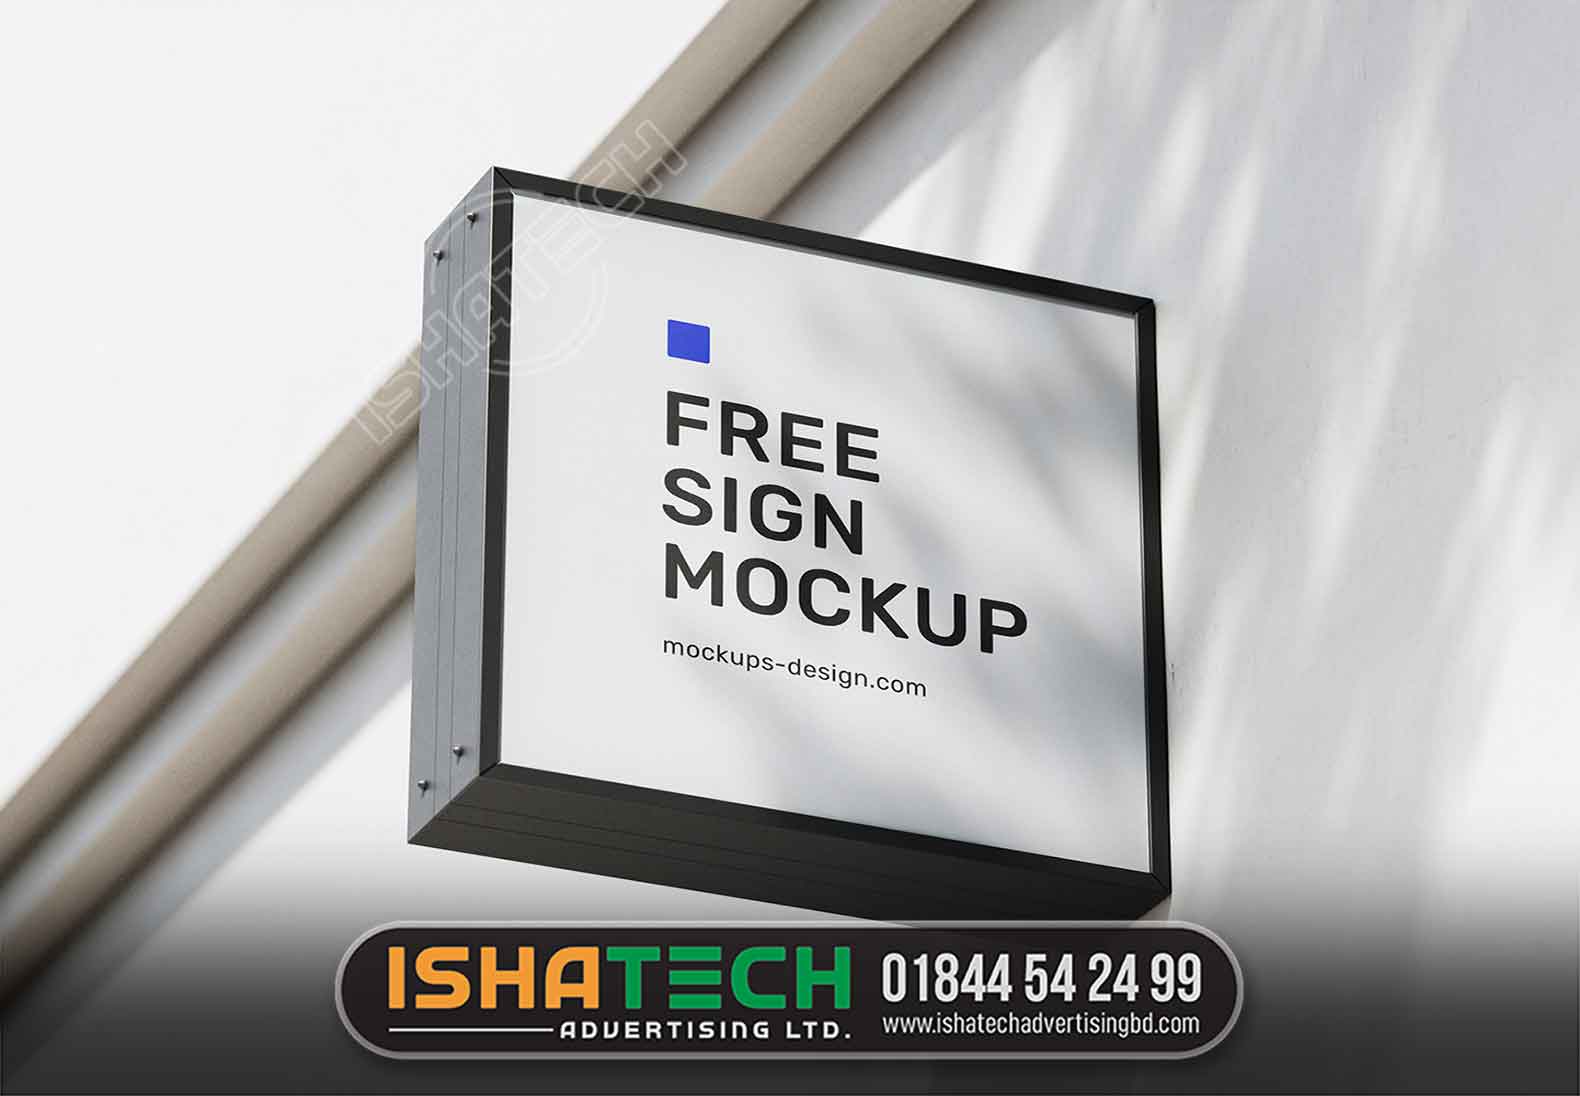 SHOPPING MALL OUTDOOR VERTICAL SIGNS DESIGN AND MAKING SERVICE IN DHAKA, BANGLADESH